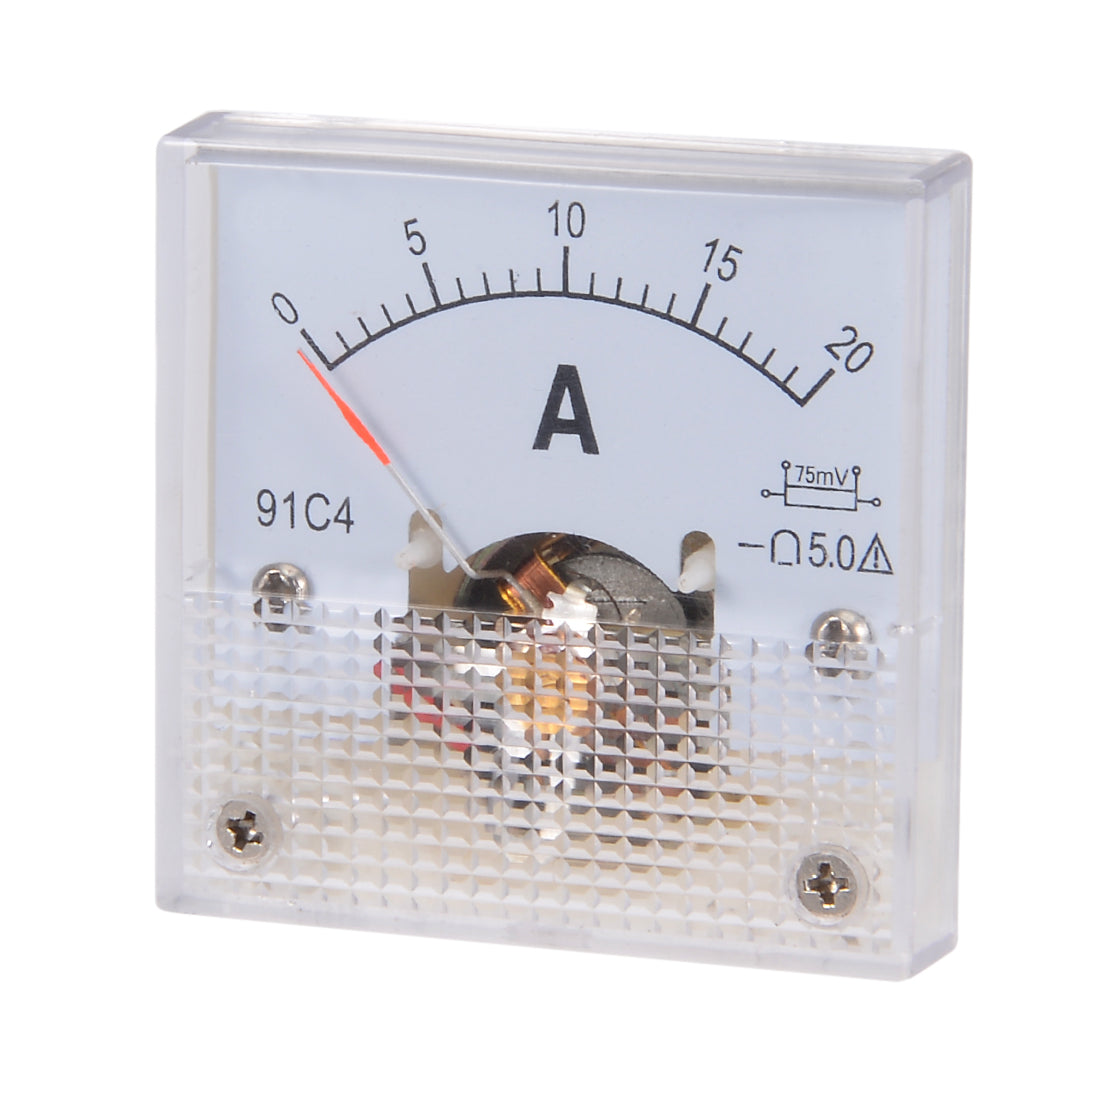 uxcell Uxcell 91C4-A Analog Current Panel Meter DC 20A Ammeter for Circuit Testing Ampere Tester Gauge 1 PCS